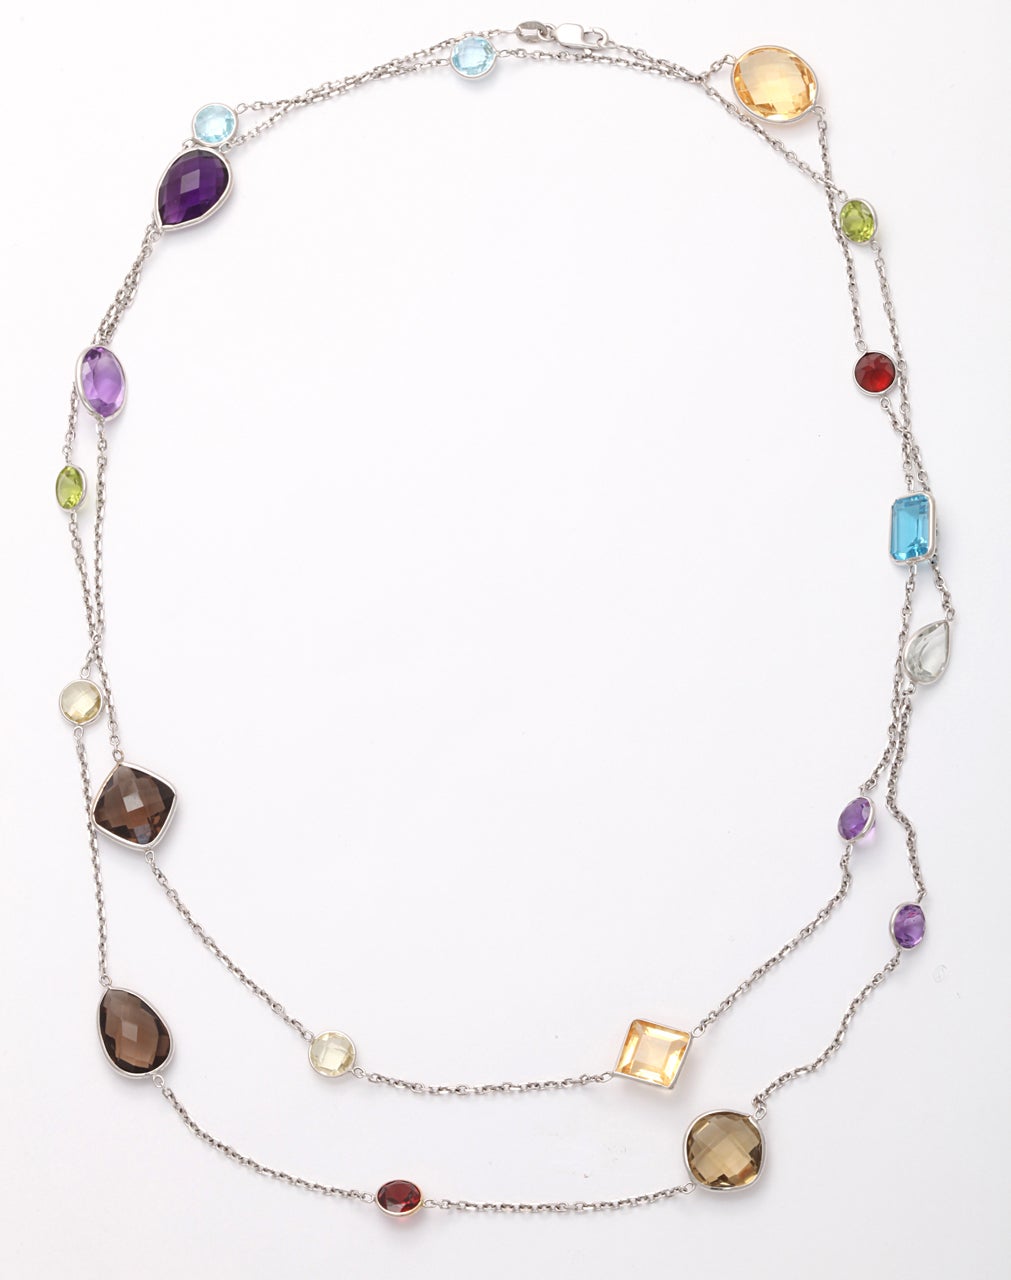 Multi color gemstone necklace crafted in 14k white gold.
Also available in 14 yellow gold.